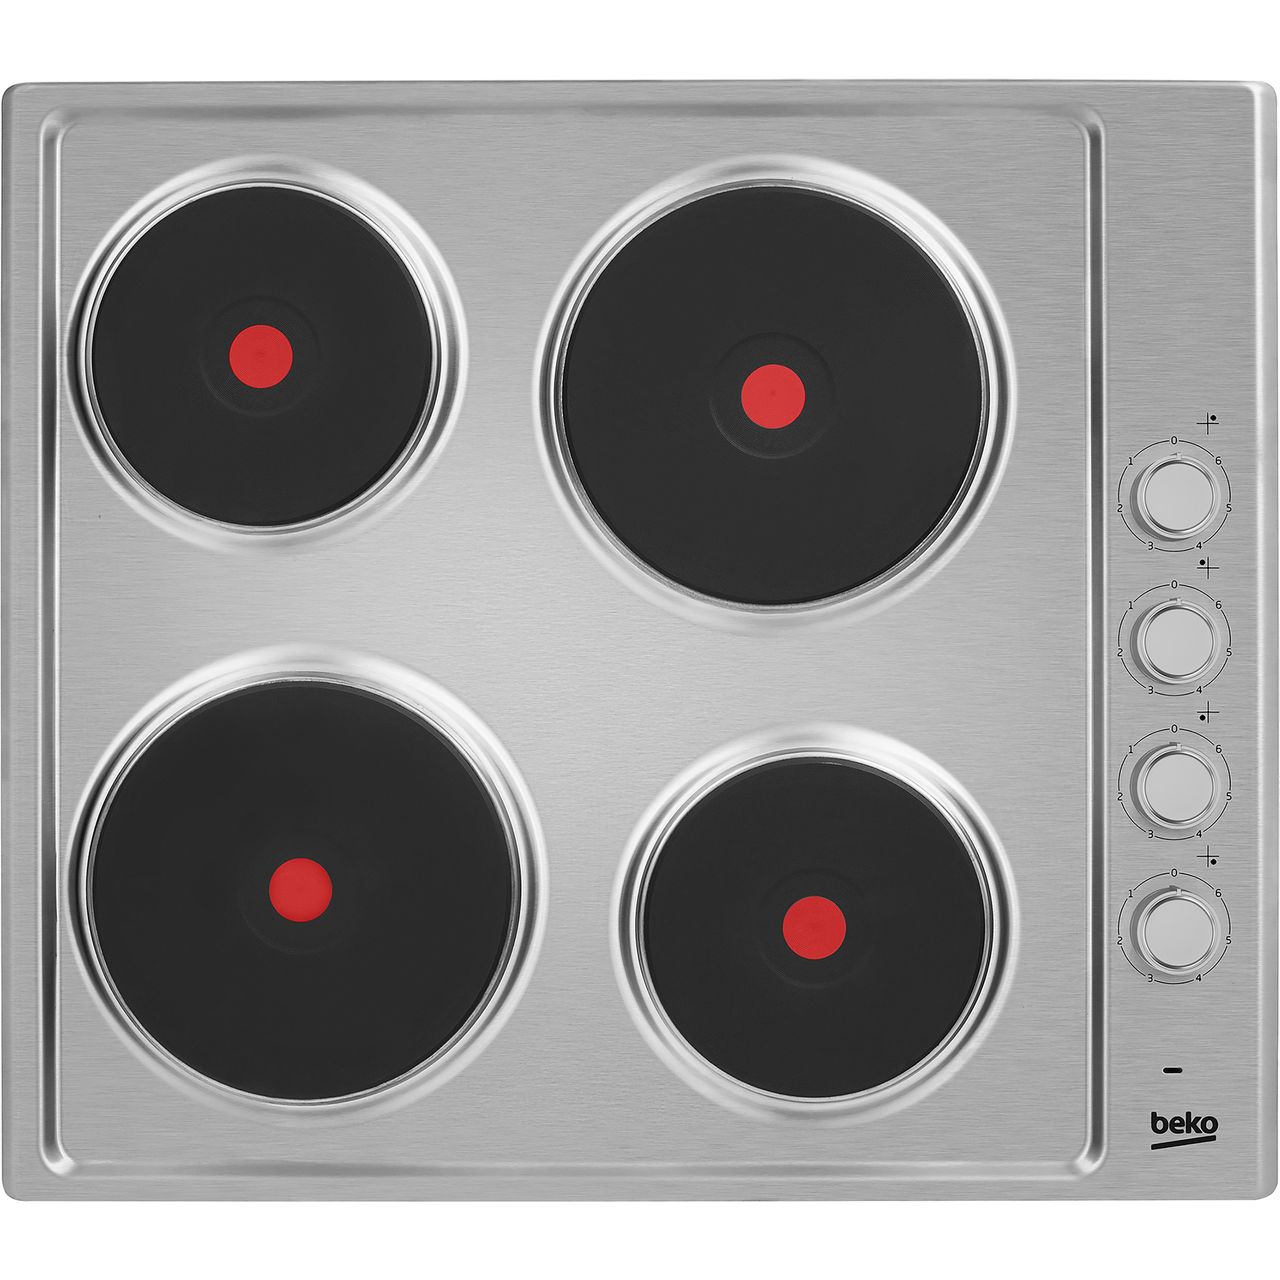 Beko HIZE64101X 58cm Solid Plate Hob Review